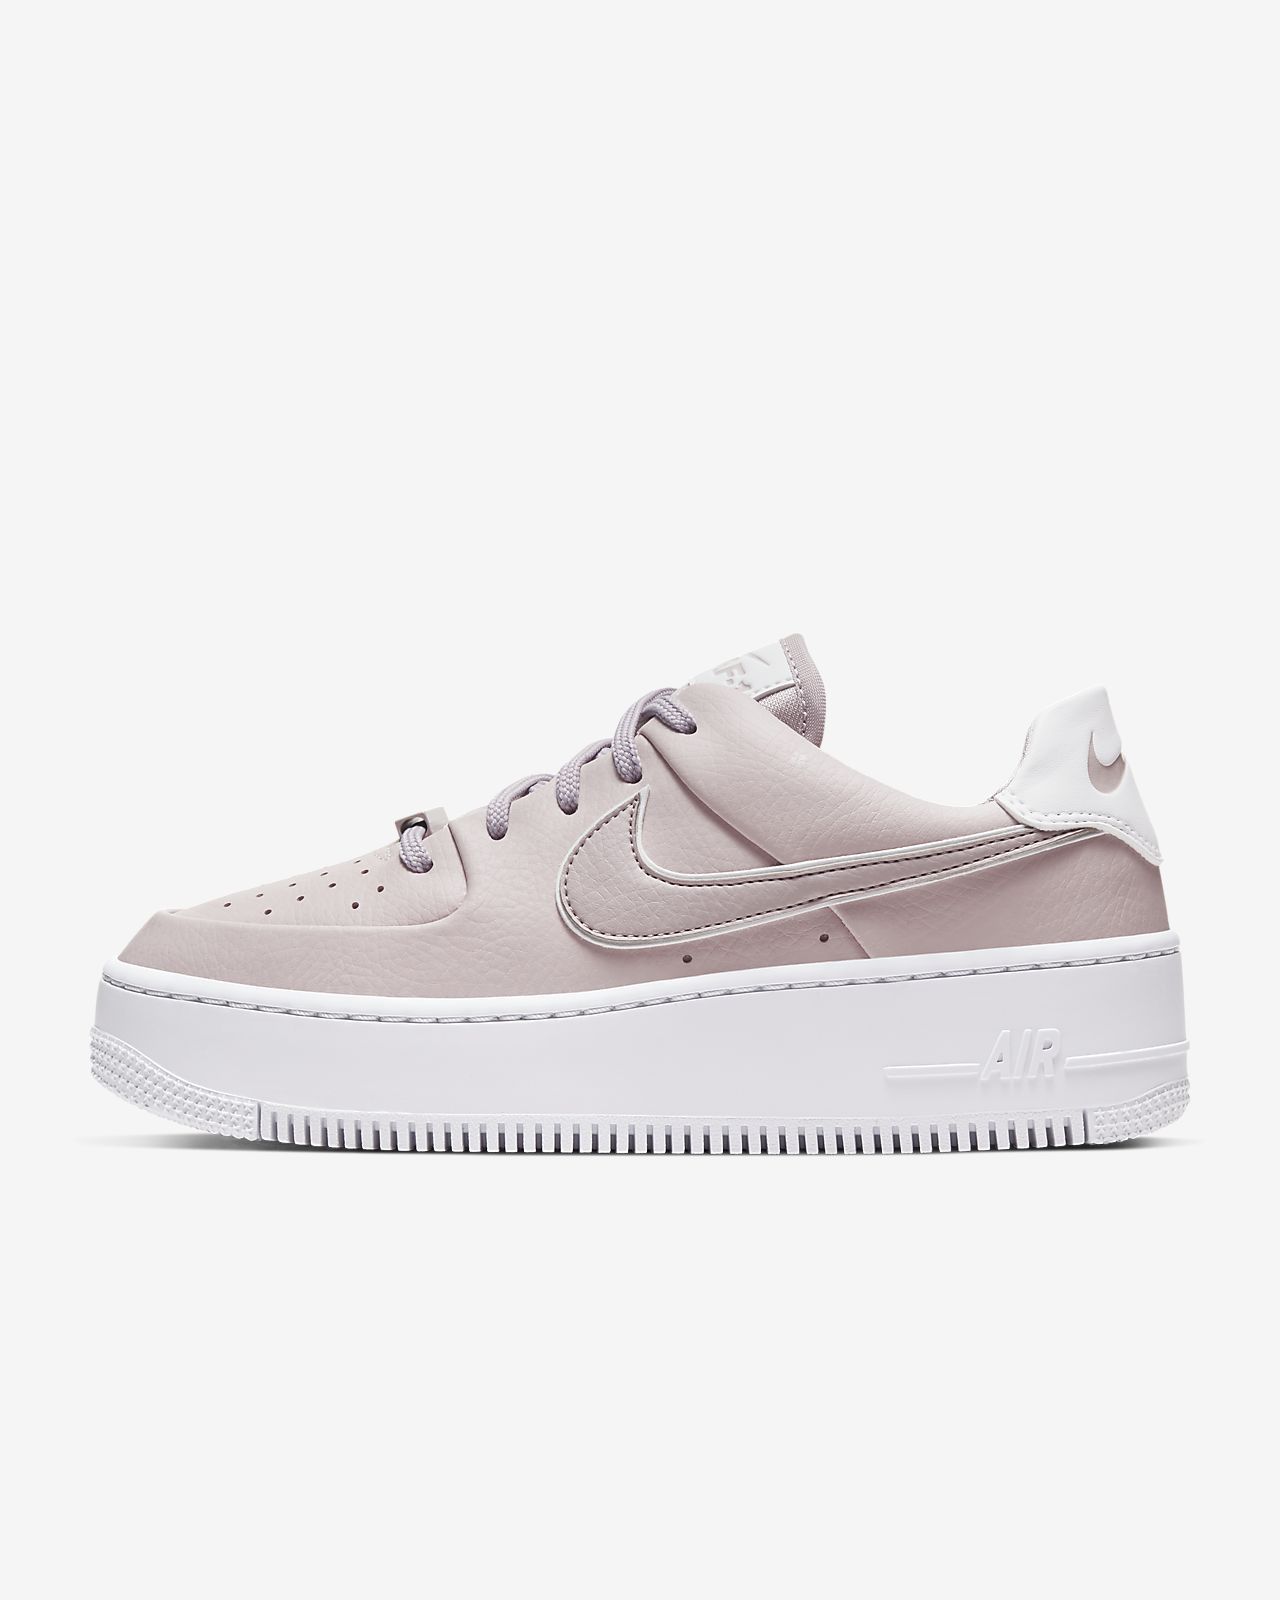 Nike Air Force 1 Sage Low | Nike Asia Pacific